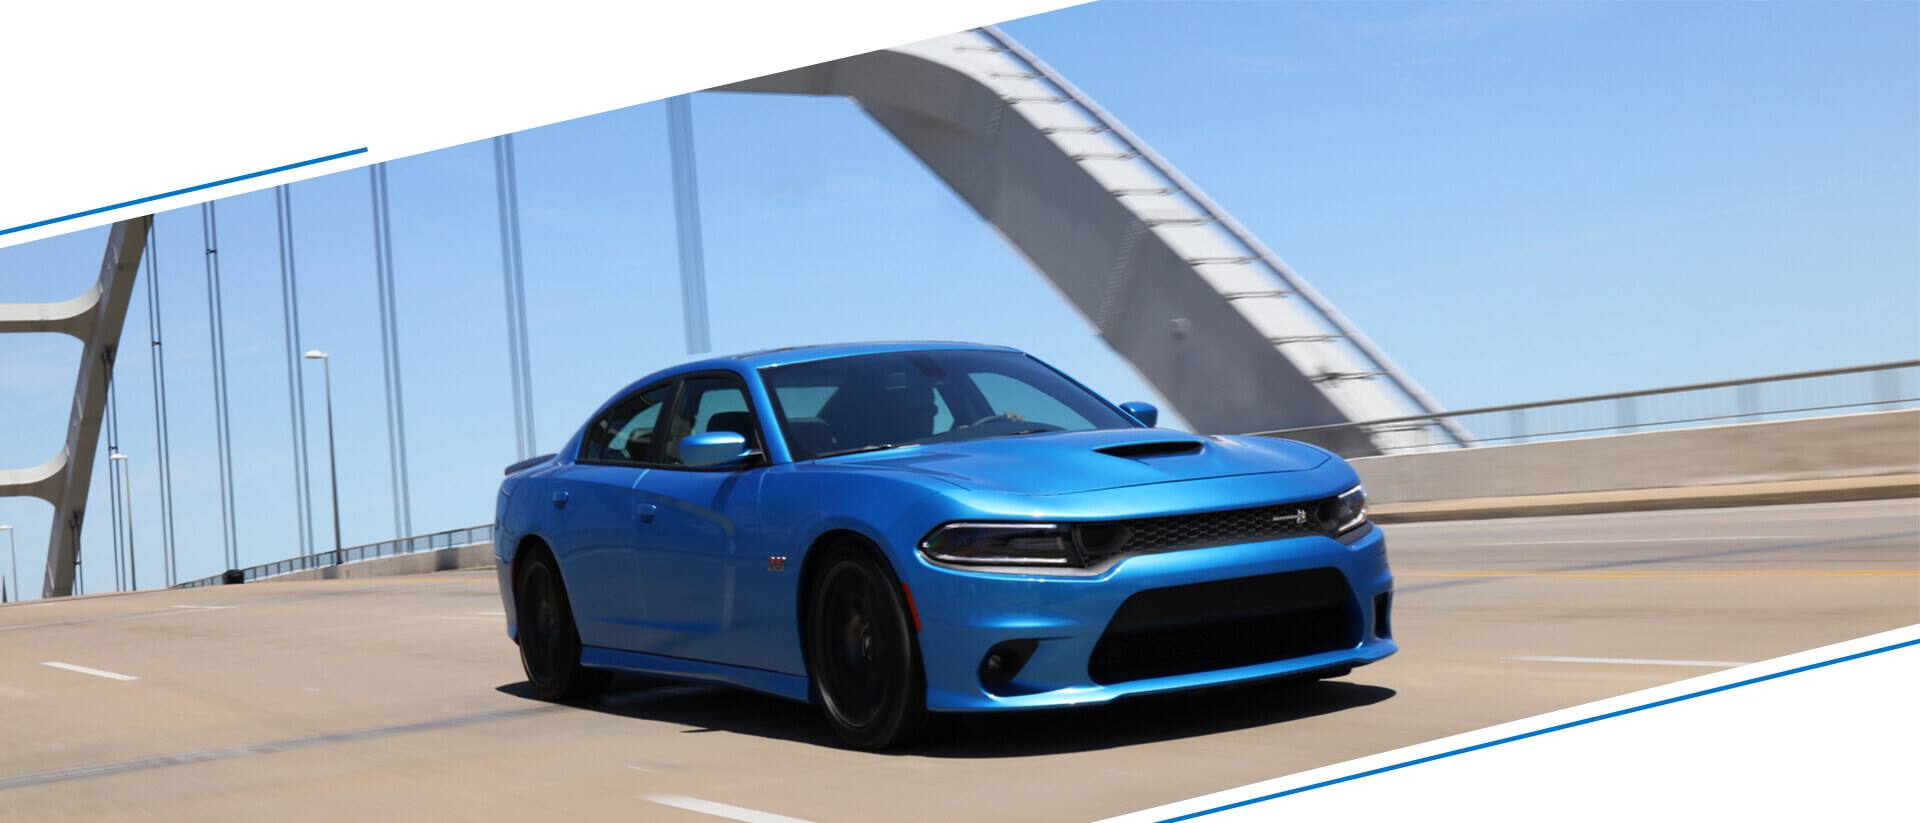 2019 Dodge Charger Exterior - Spoilers, Body Kits, Colors & More